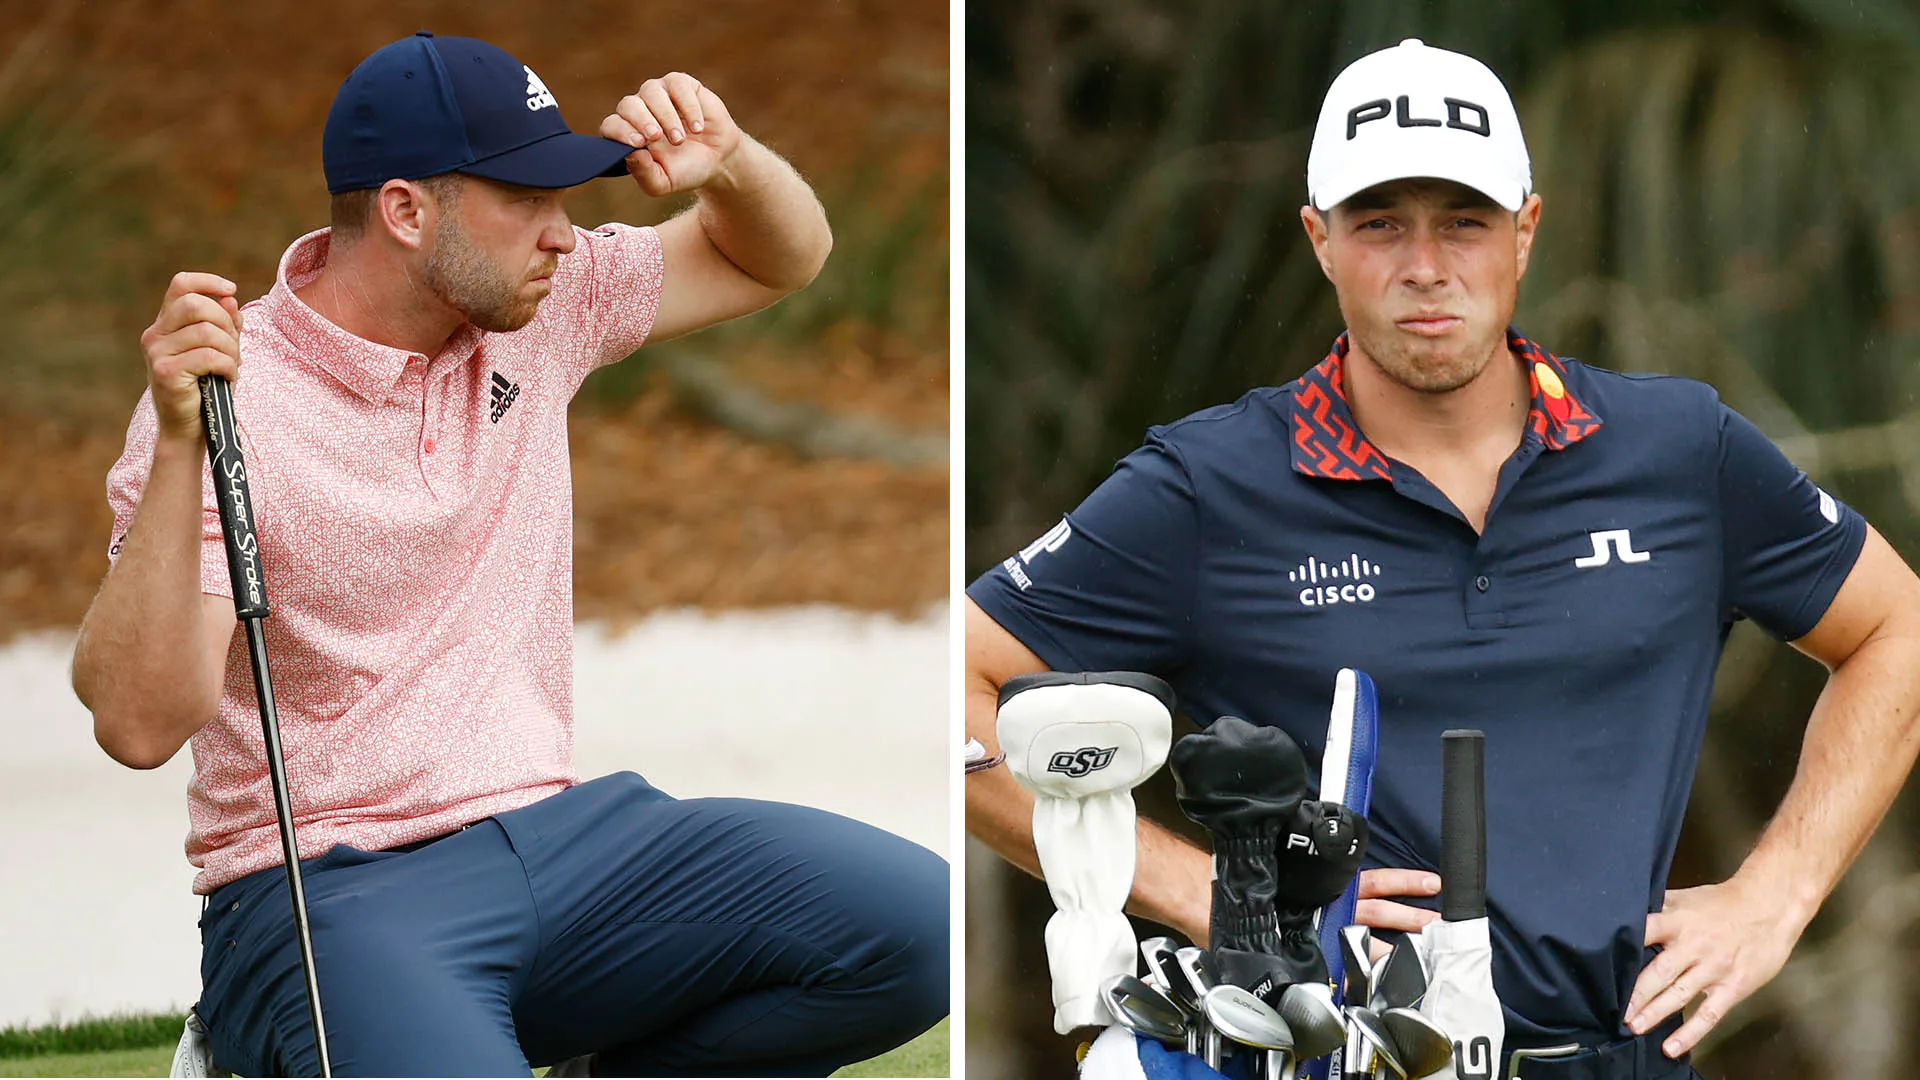 'We've got to protect the field': Daniel Berger's drop scrutinized by playing competitors 2